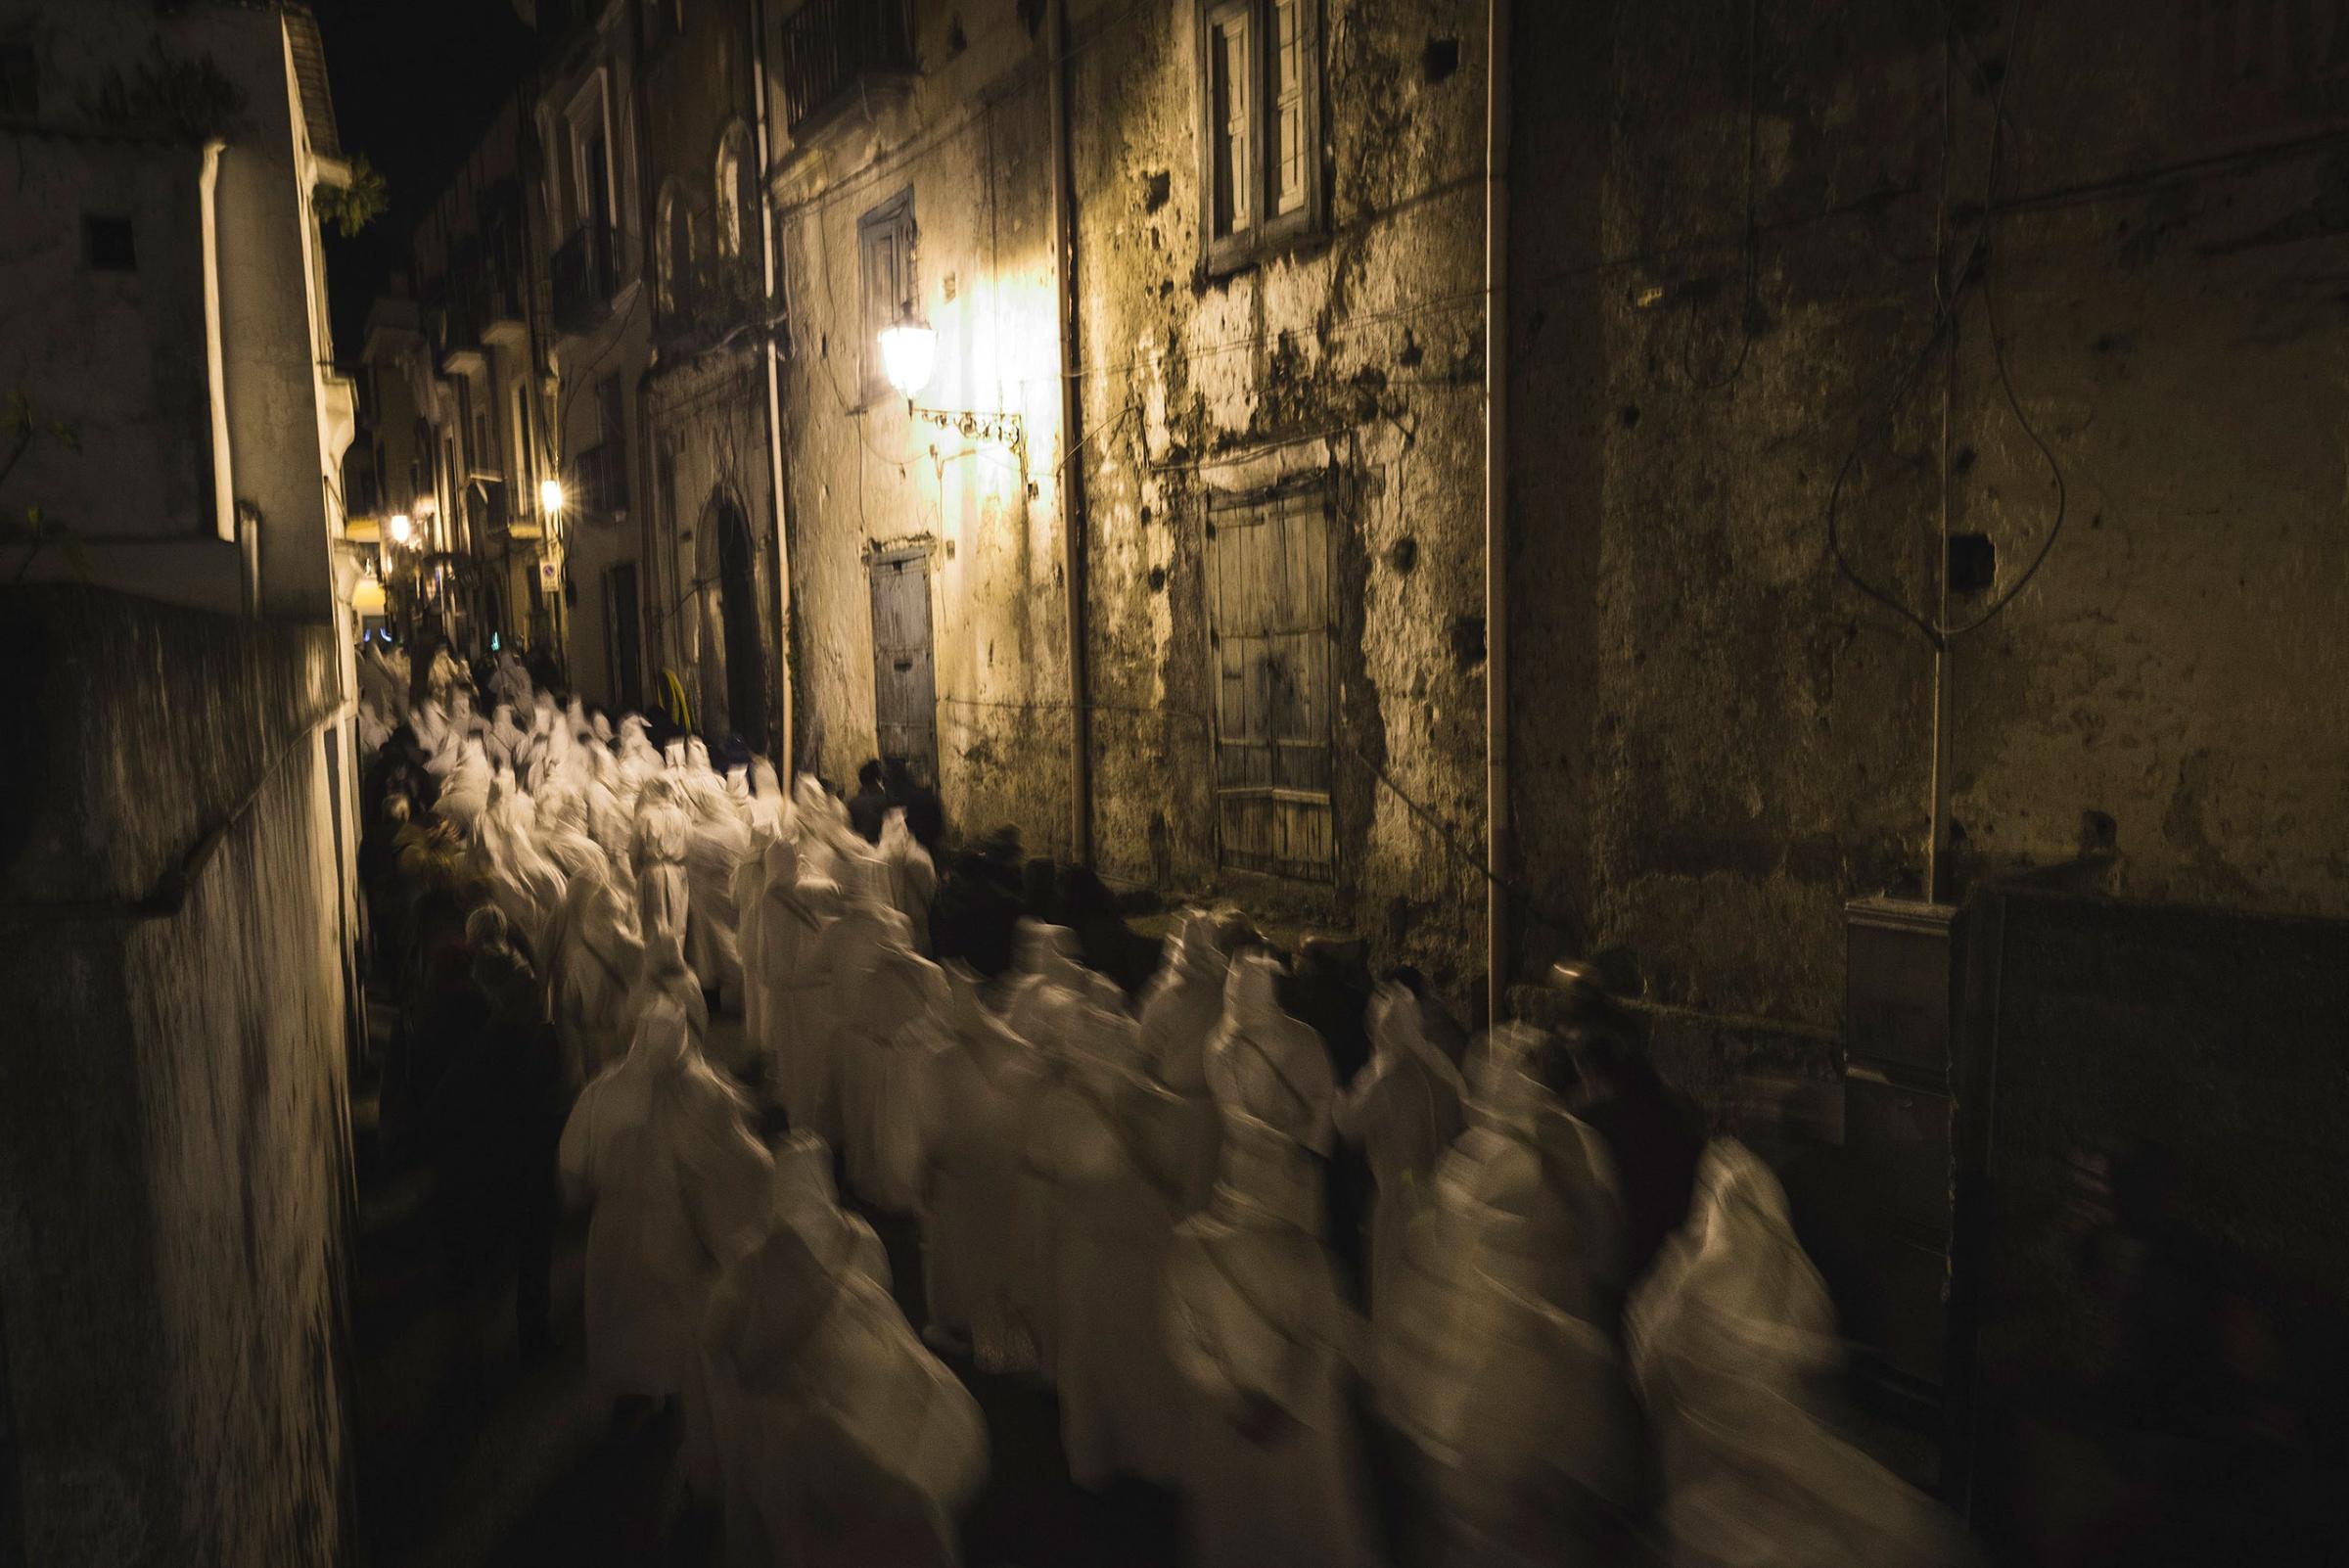 Participants attend the Penitential Procession of the "Battenti" with dozens of hooded penitents and centuries-old songs in Minori, Italy, March 24, 2016.